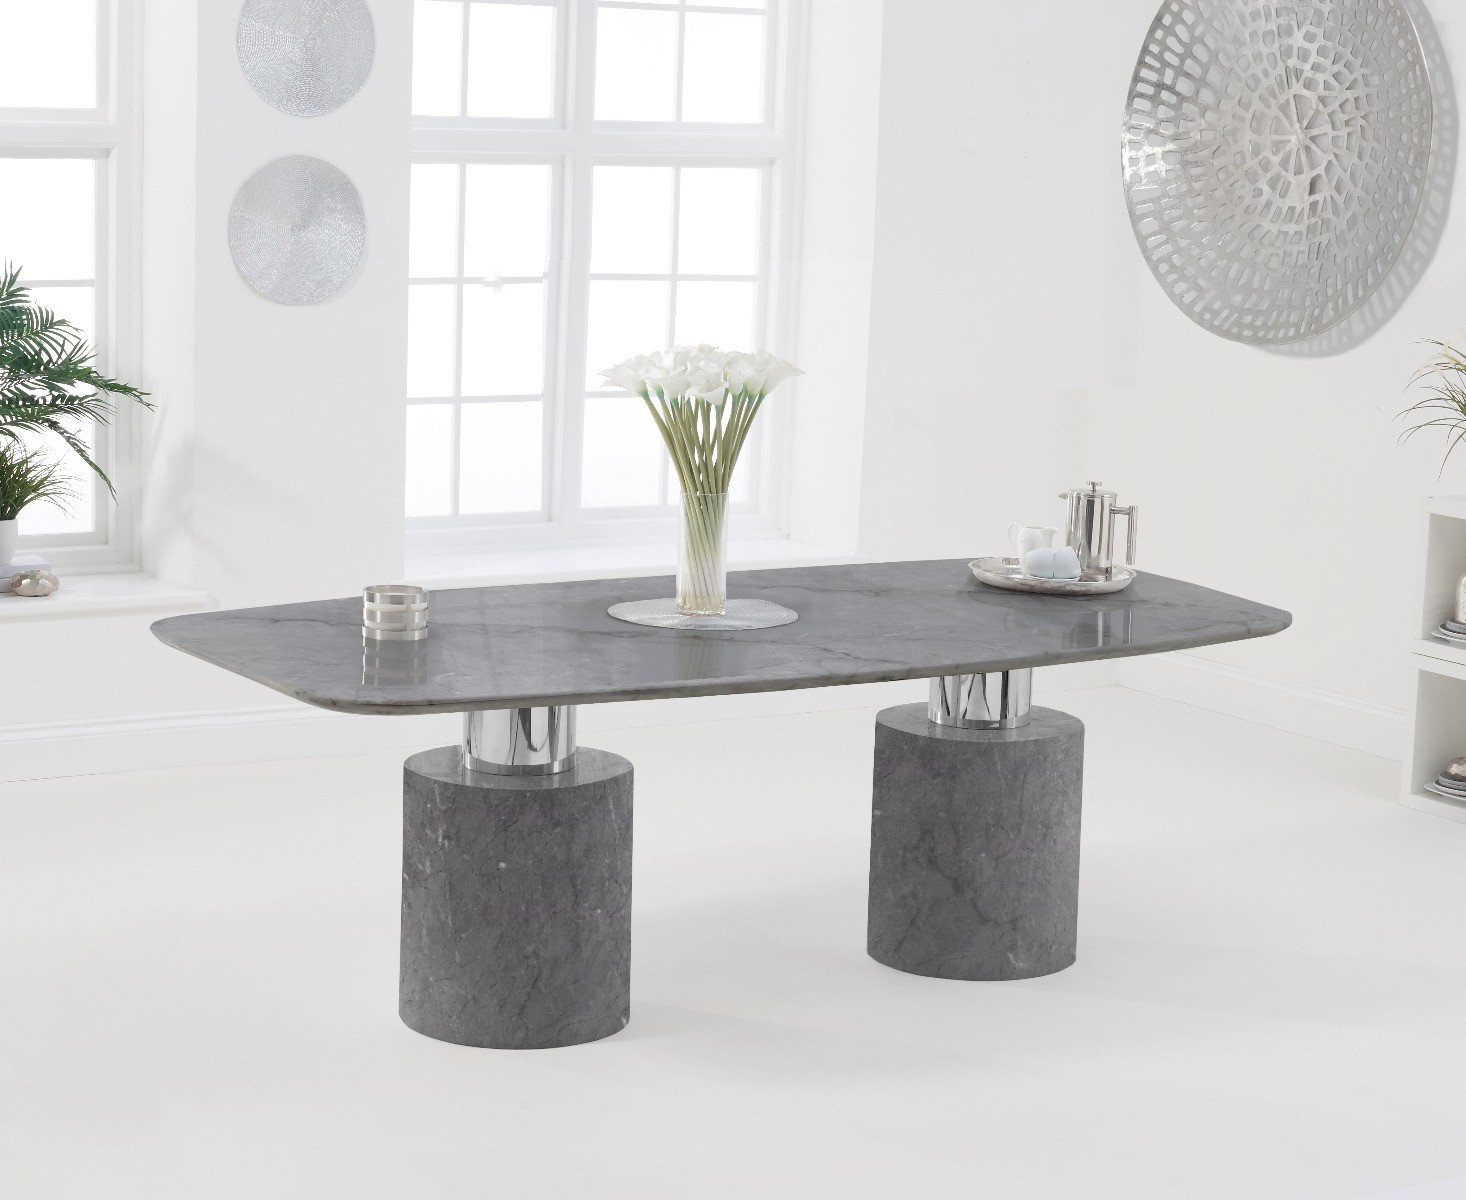 Photo 2 of Antonio 220cm grey marble dining table with 6 grey lorenzo chairs